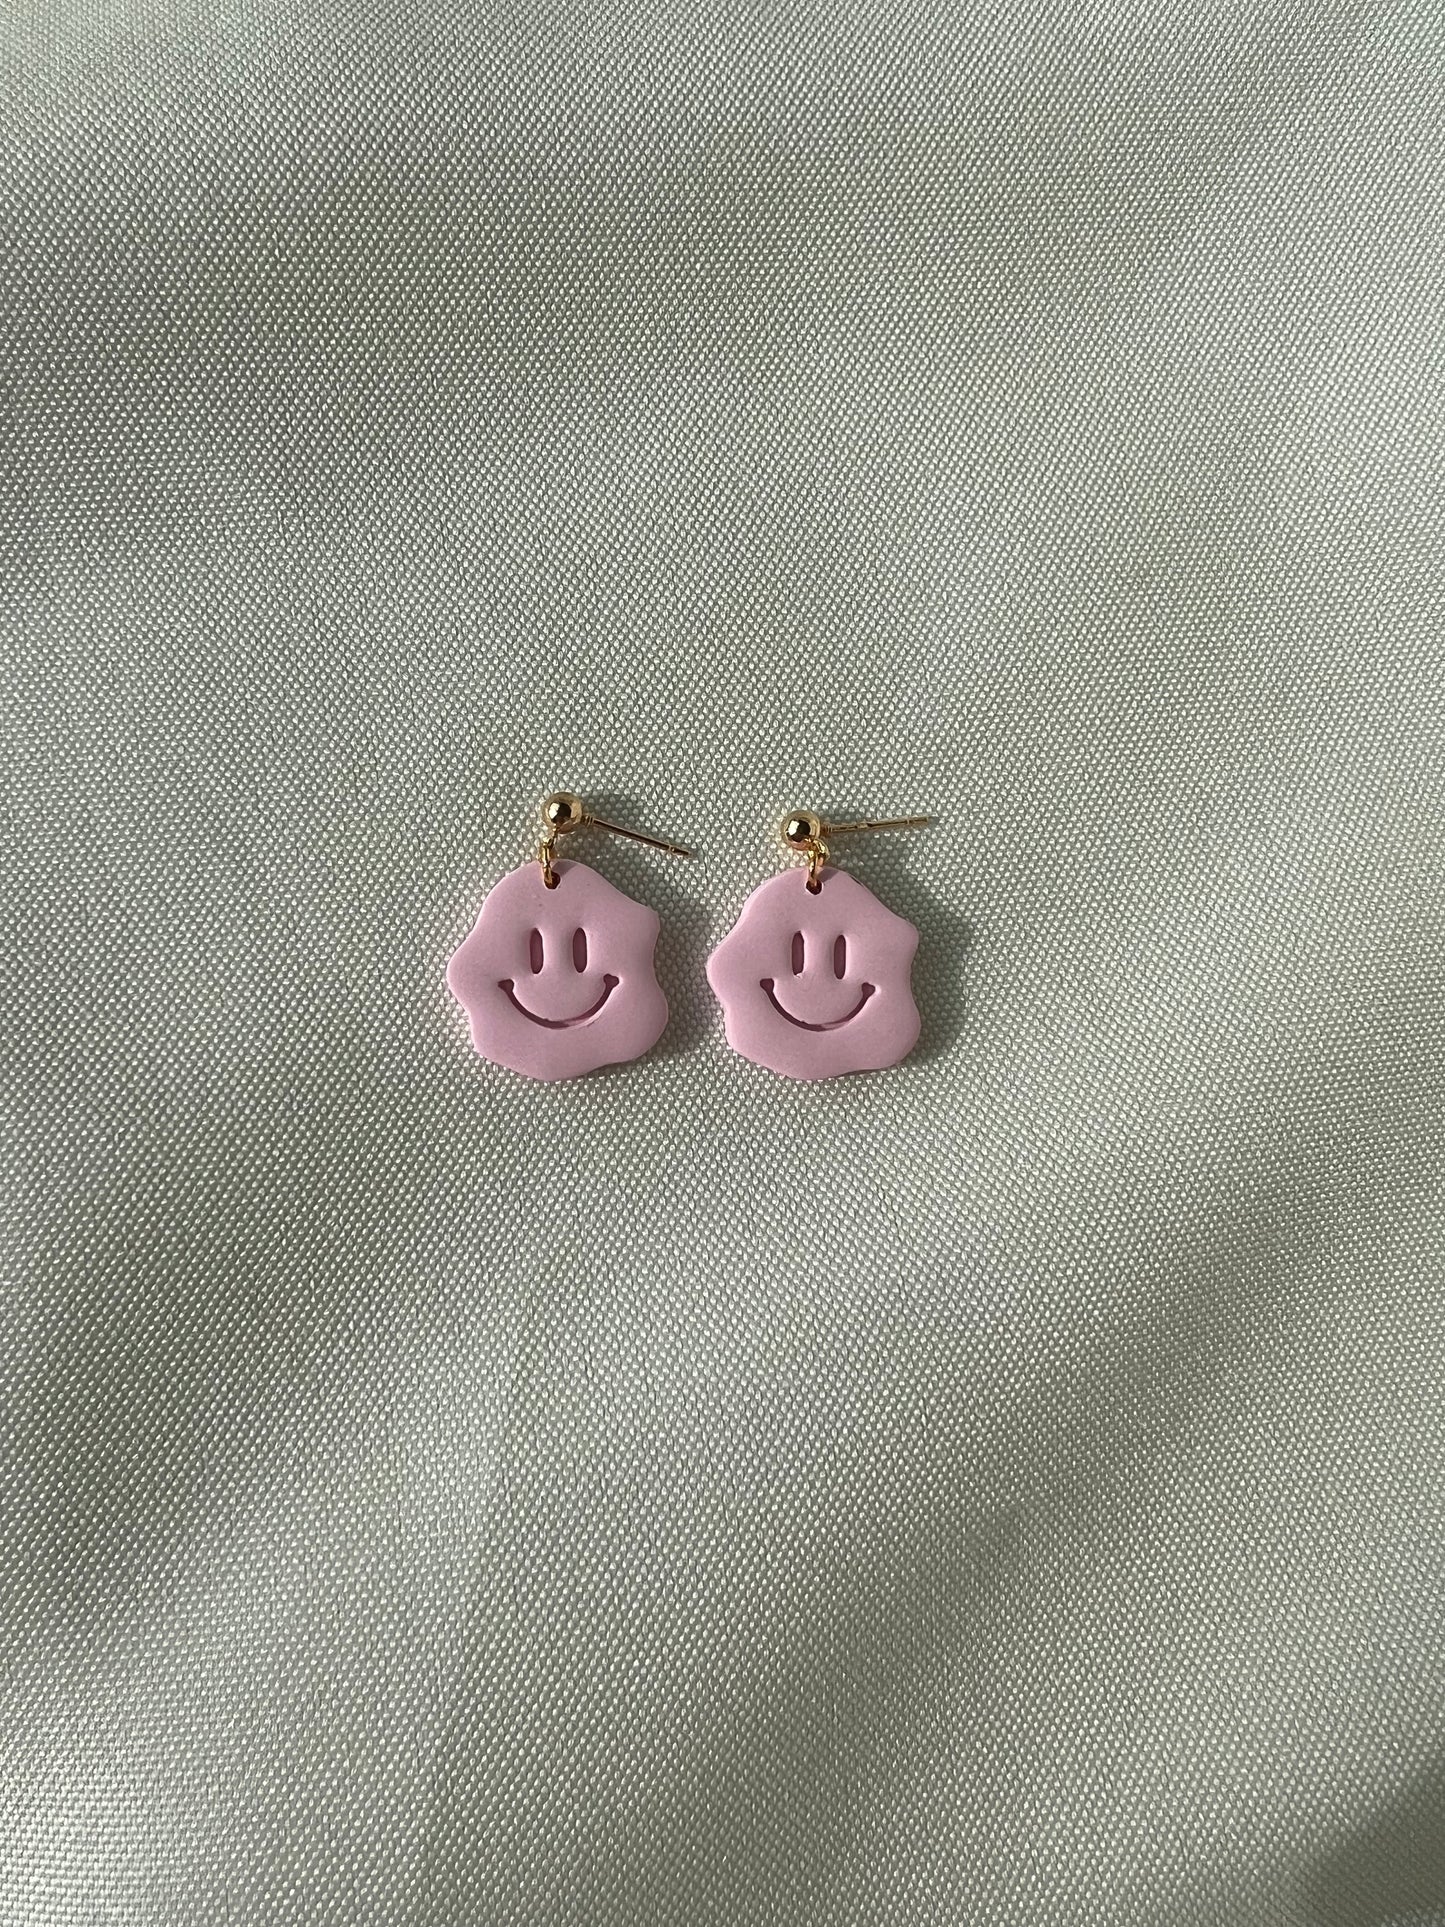 pink smiley face